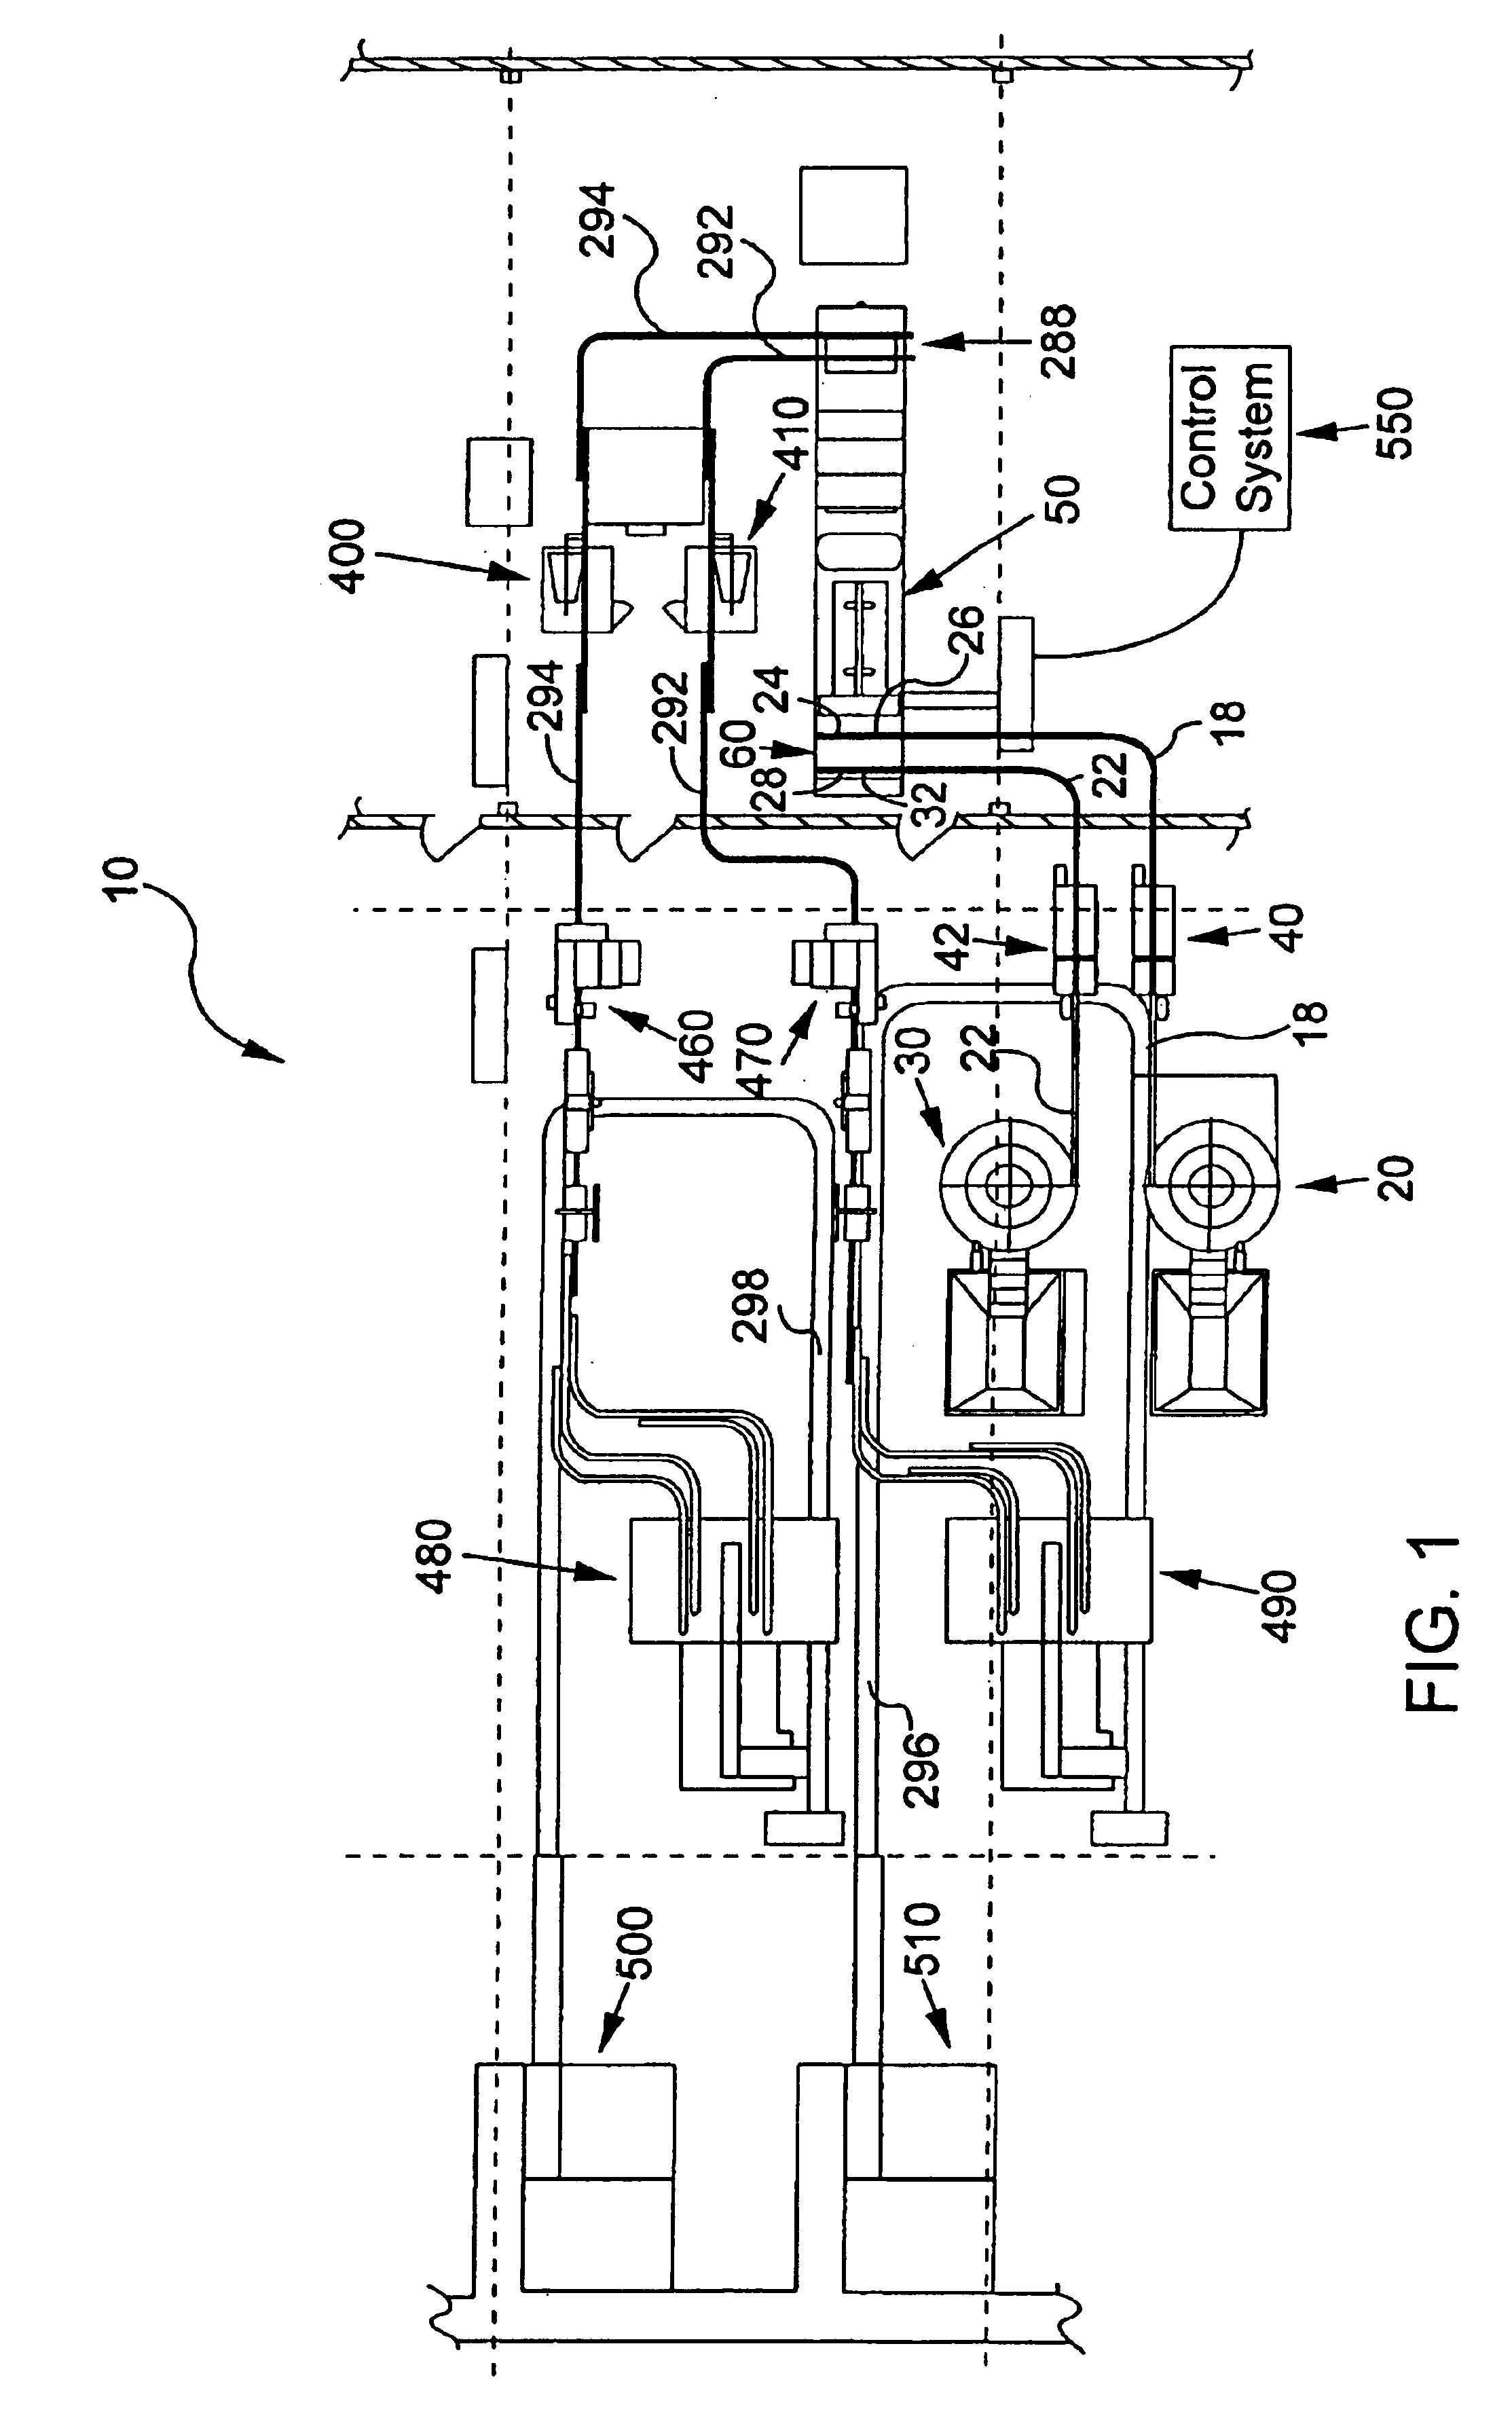 Method and apparatus for aseptic packaging